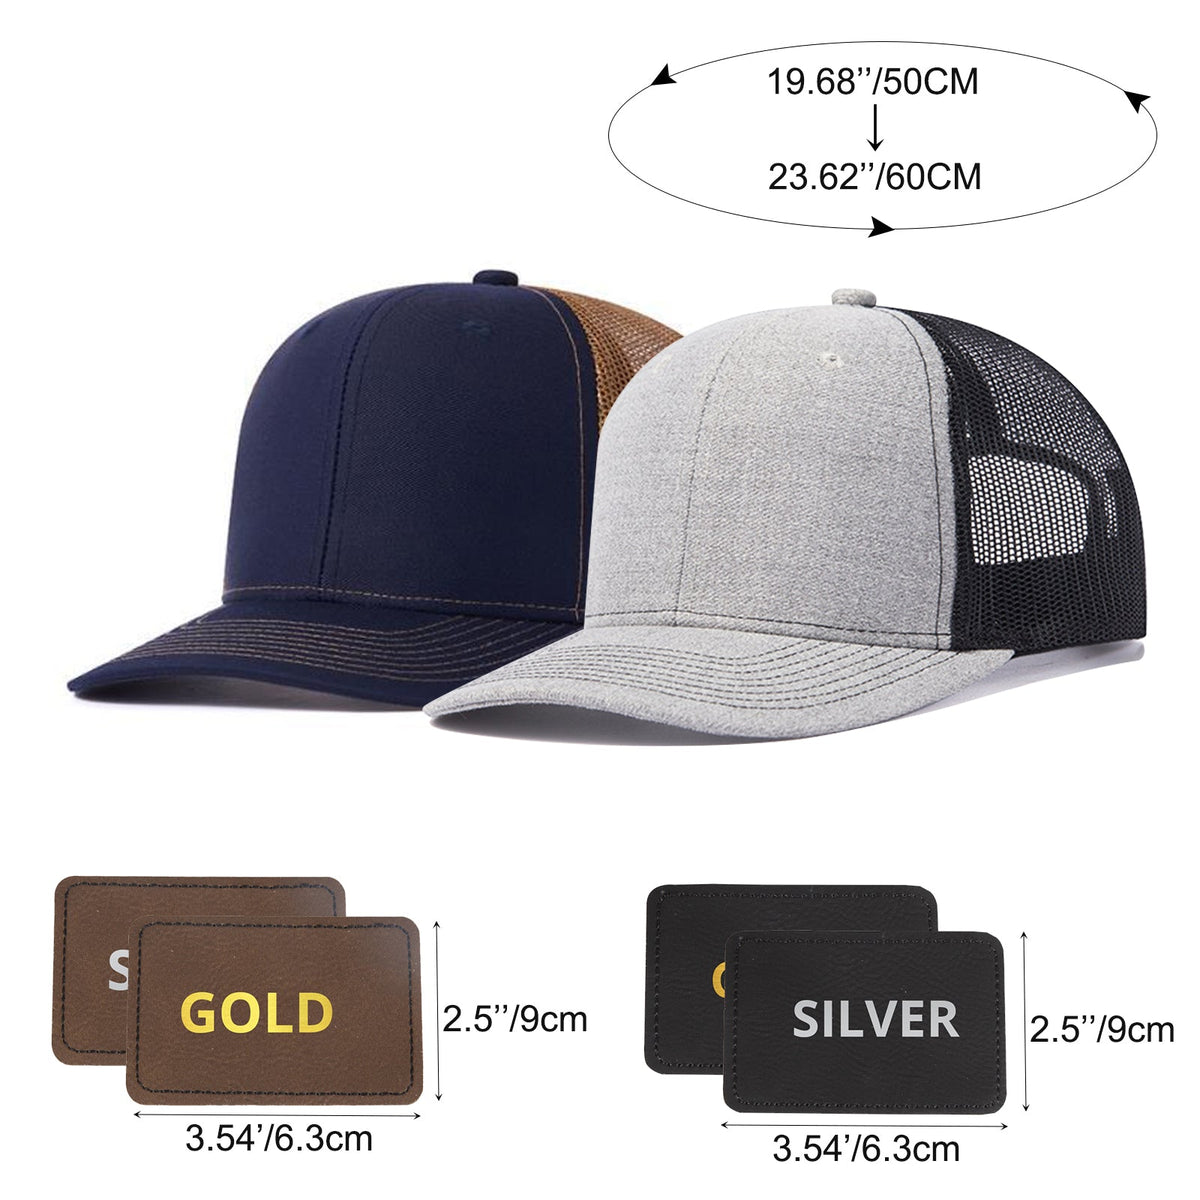 Two CrealityFalcon 2 pcs Adjustable Men Mesh Trucker Hats with 4pcs Self-adhesive Cap Stickers for Laser Engraving are displayed side by side. One hat is navy blue with a brown mesh back, and the other is light grey with a black mesh back. Dimensions of the hats are listed above them, while below, two laser-engraved patches labeled "GOLD" and "SILVER" showcase fine craftsmanship.